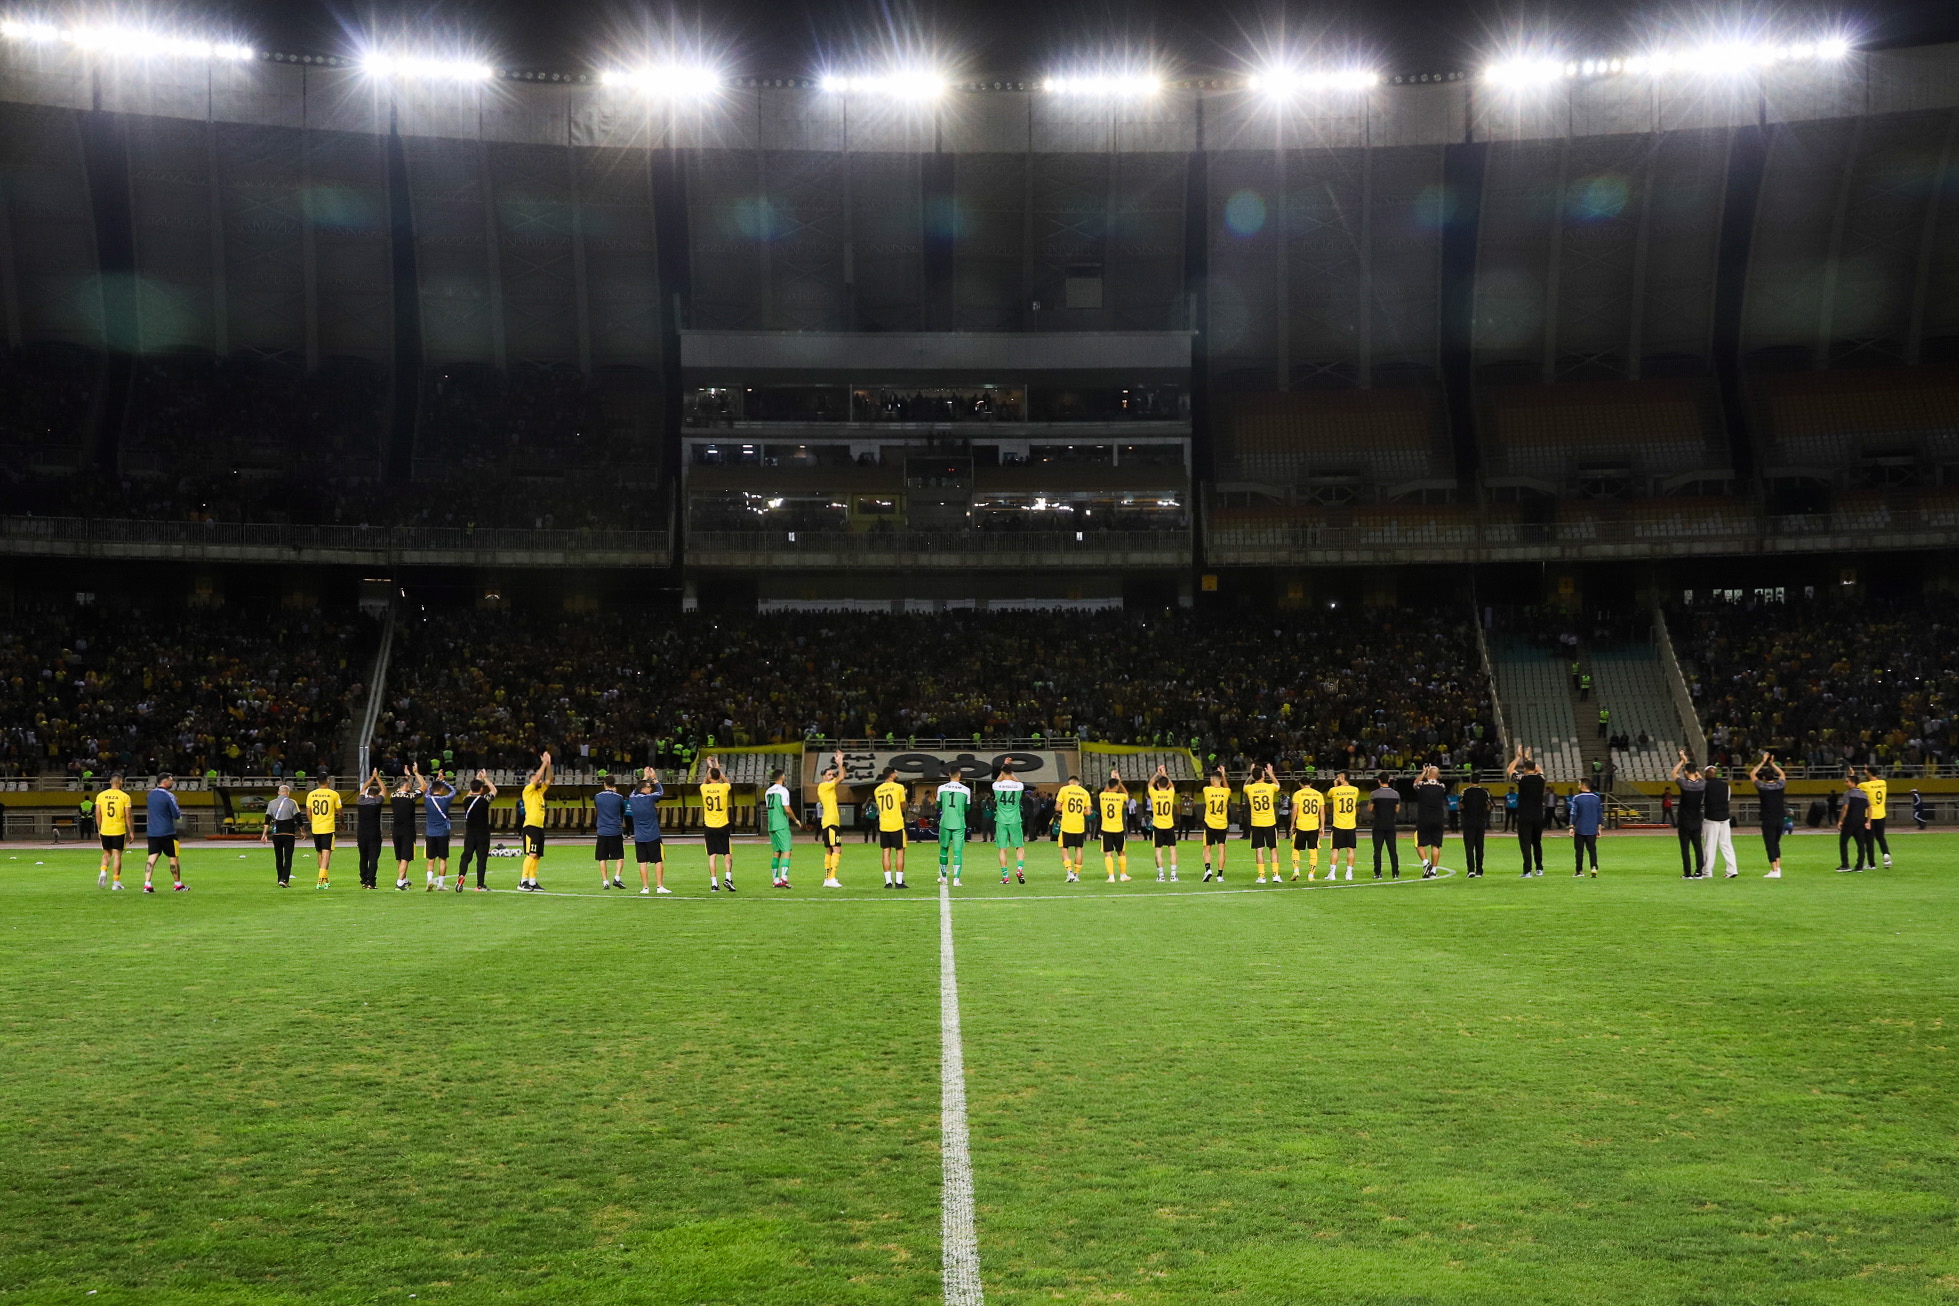 Al-Ittihad refused to play a match against Sepahan in the Asian